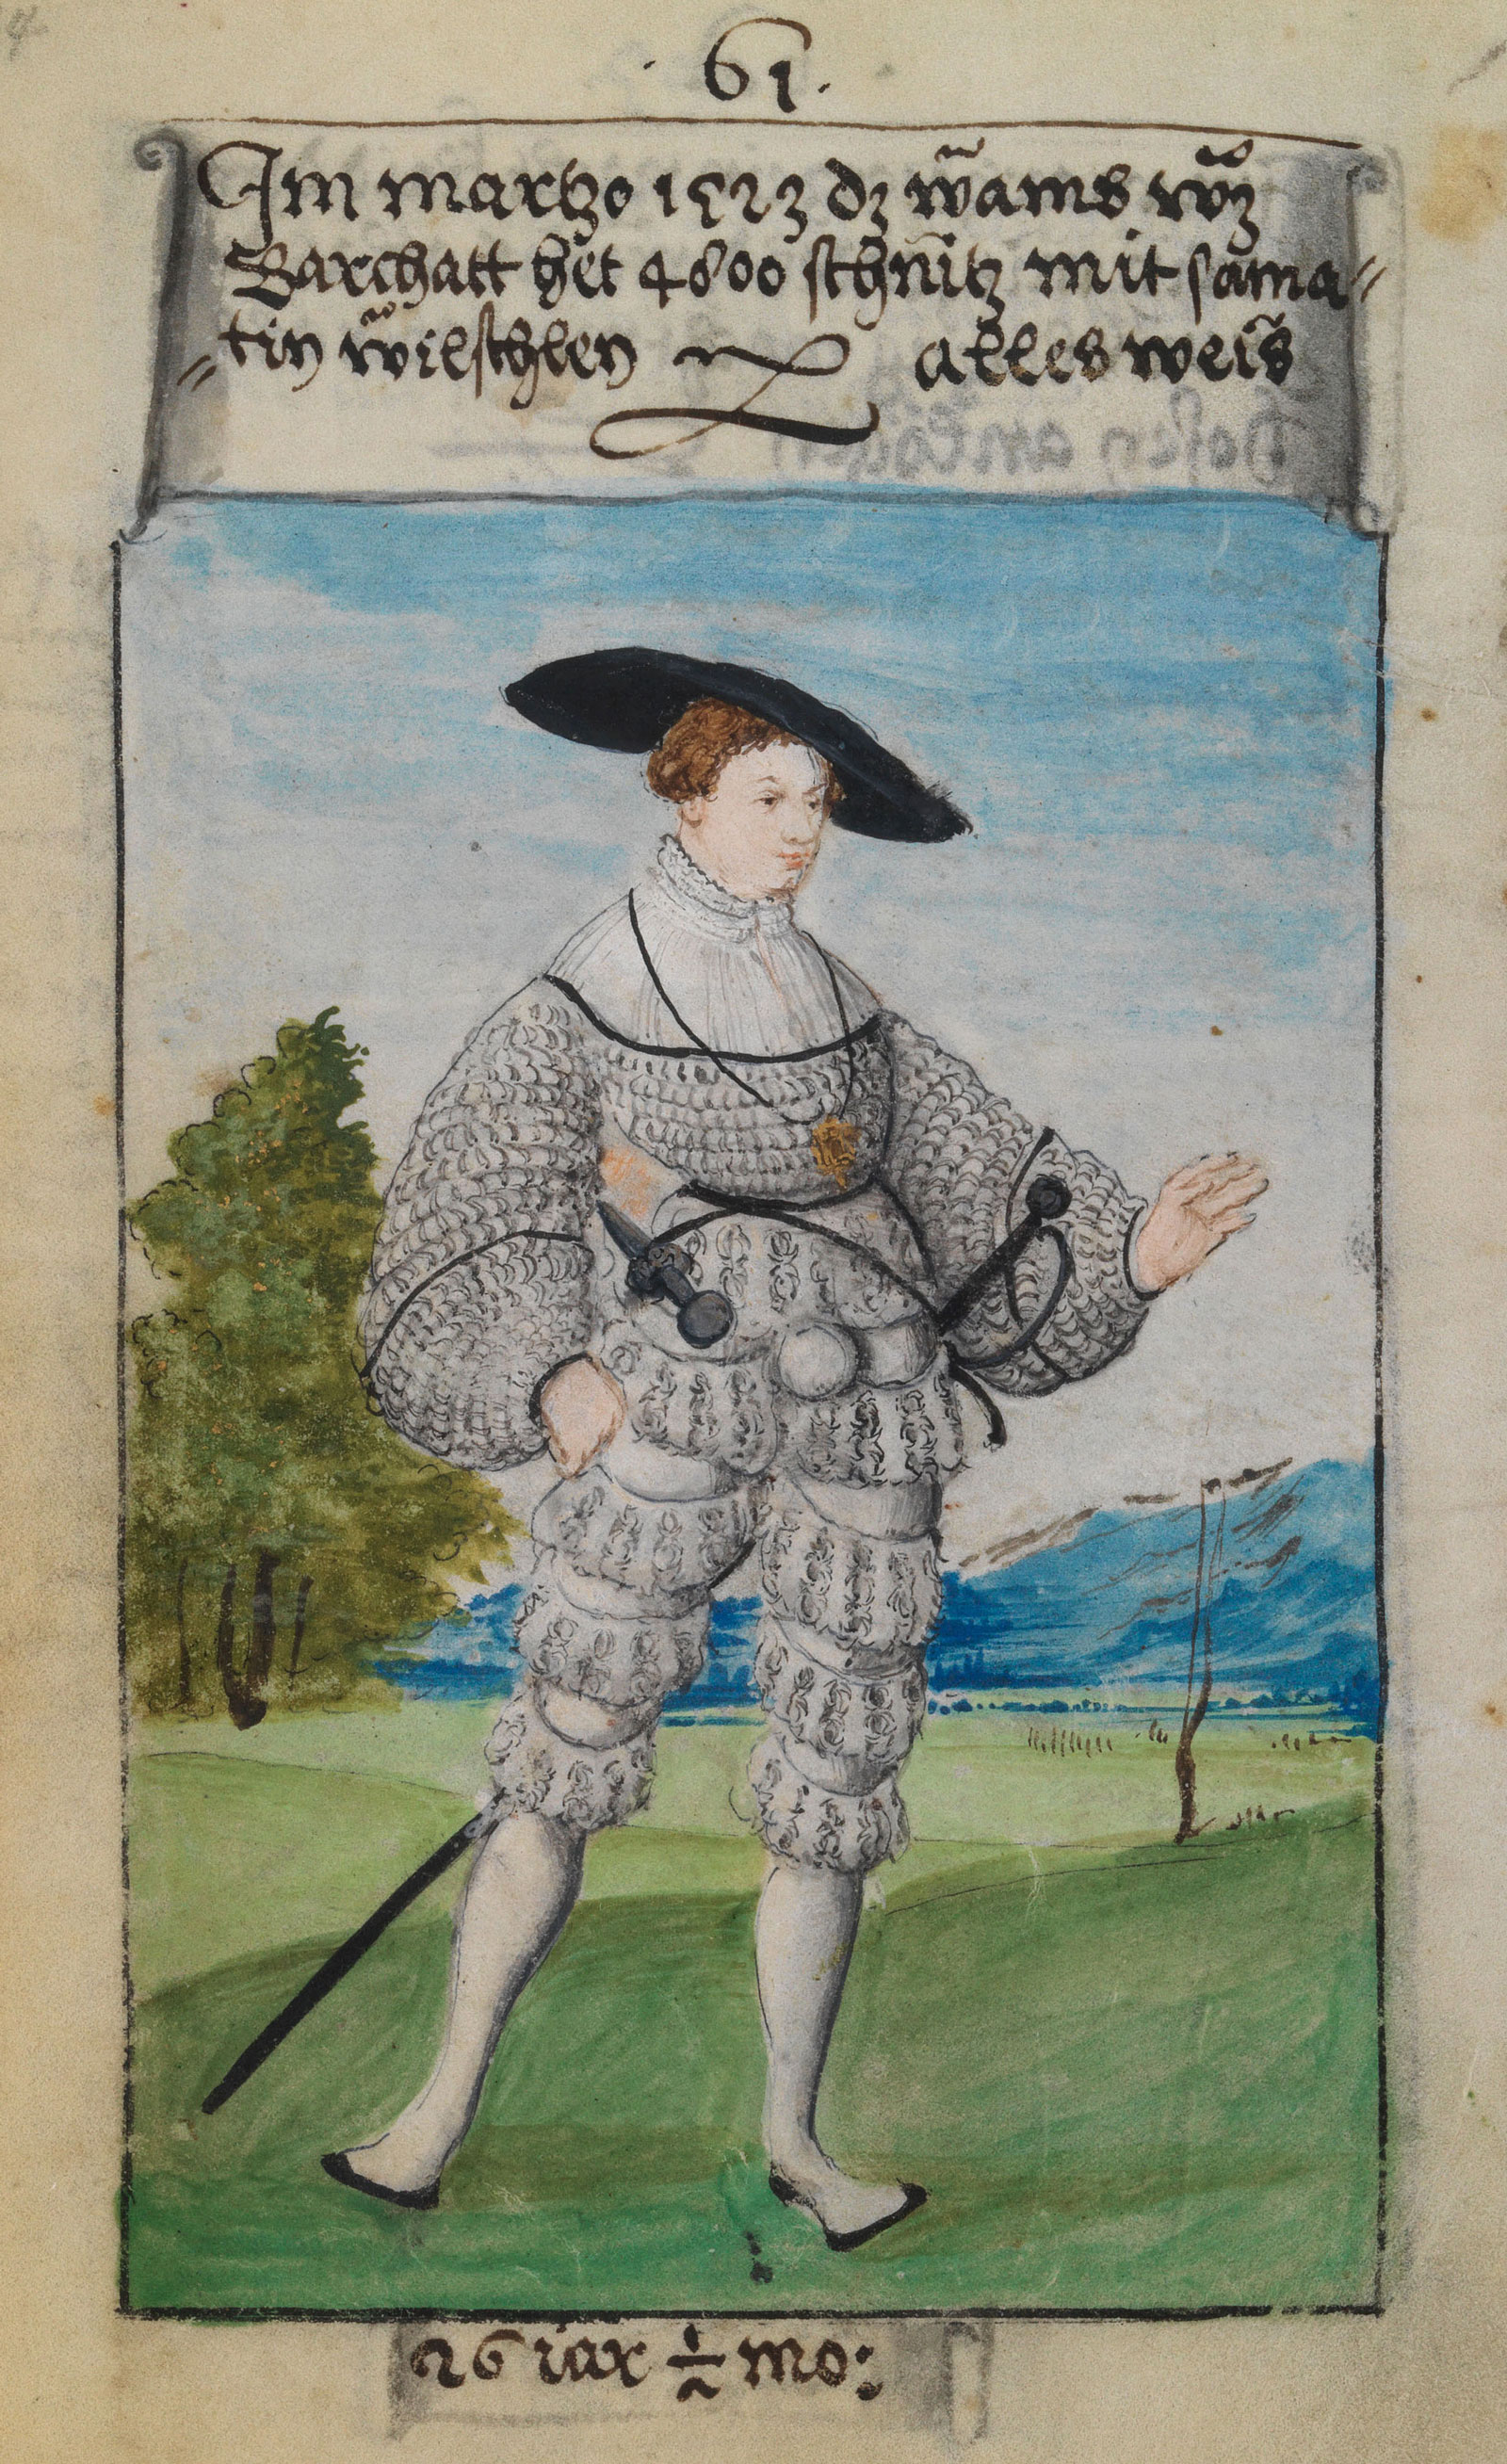 A page from The First Book of Fashion; the text above reads, "In March 1523. The doublet of fustian, which has 4,800 slashes with velvet rolls all in white," and the text below, "26 years. 1/2 month."